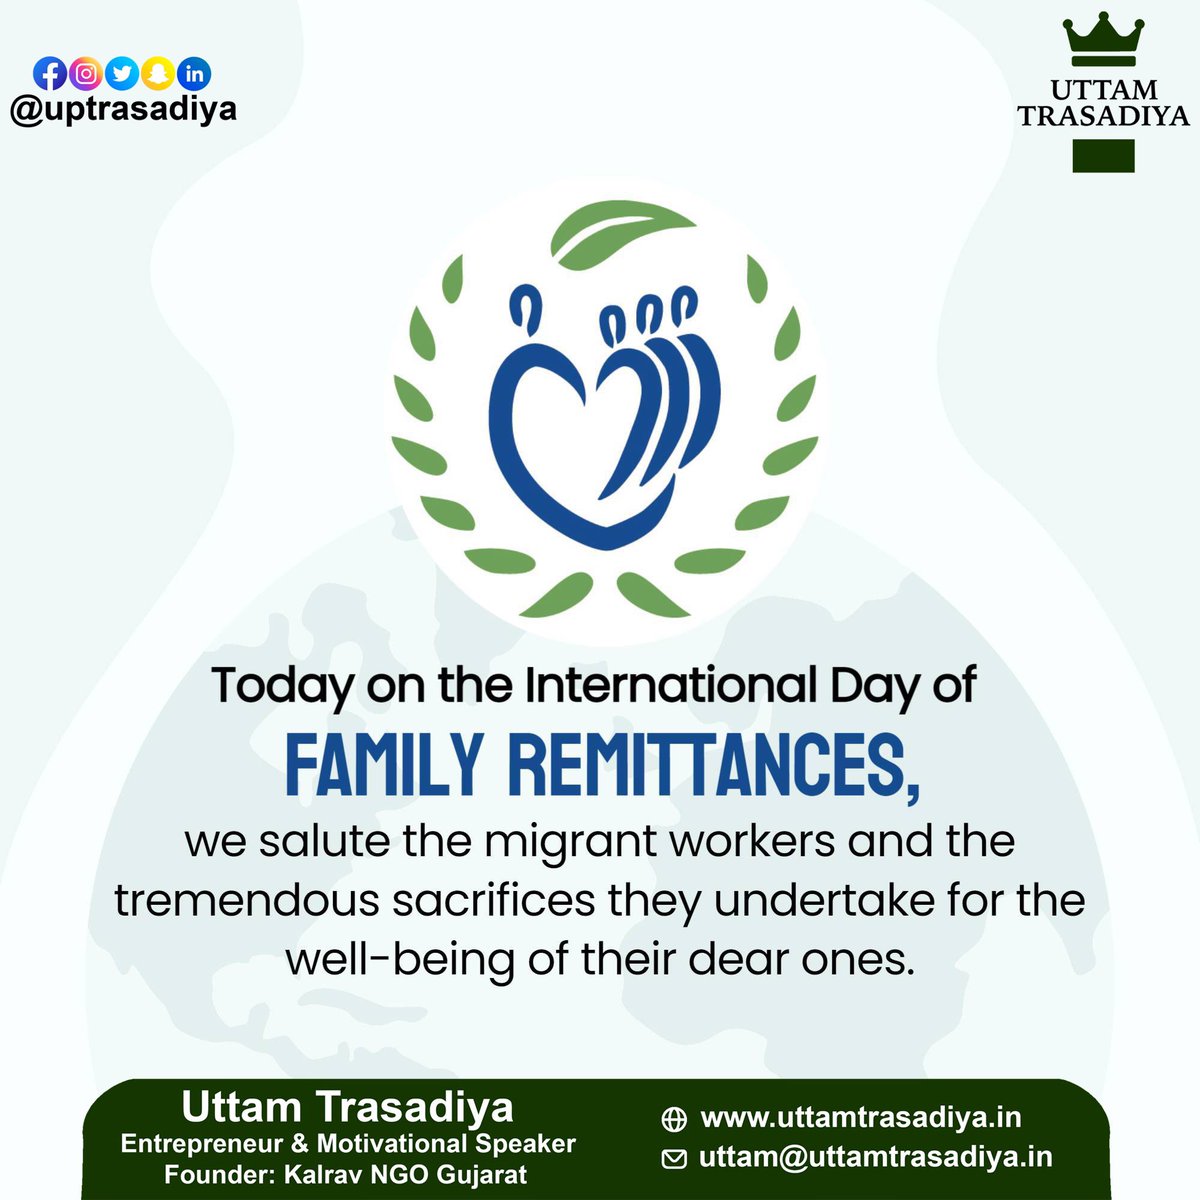 Today on the International Day of FAMILY REMITTANCES,
we salute the migrant workers and the tremendous sacrifices they undertake for the well-being of their dear ones.

#InternationalDayOfFamilyRemittances #FamilyRemittancesDay